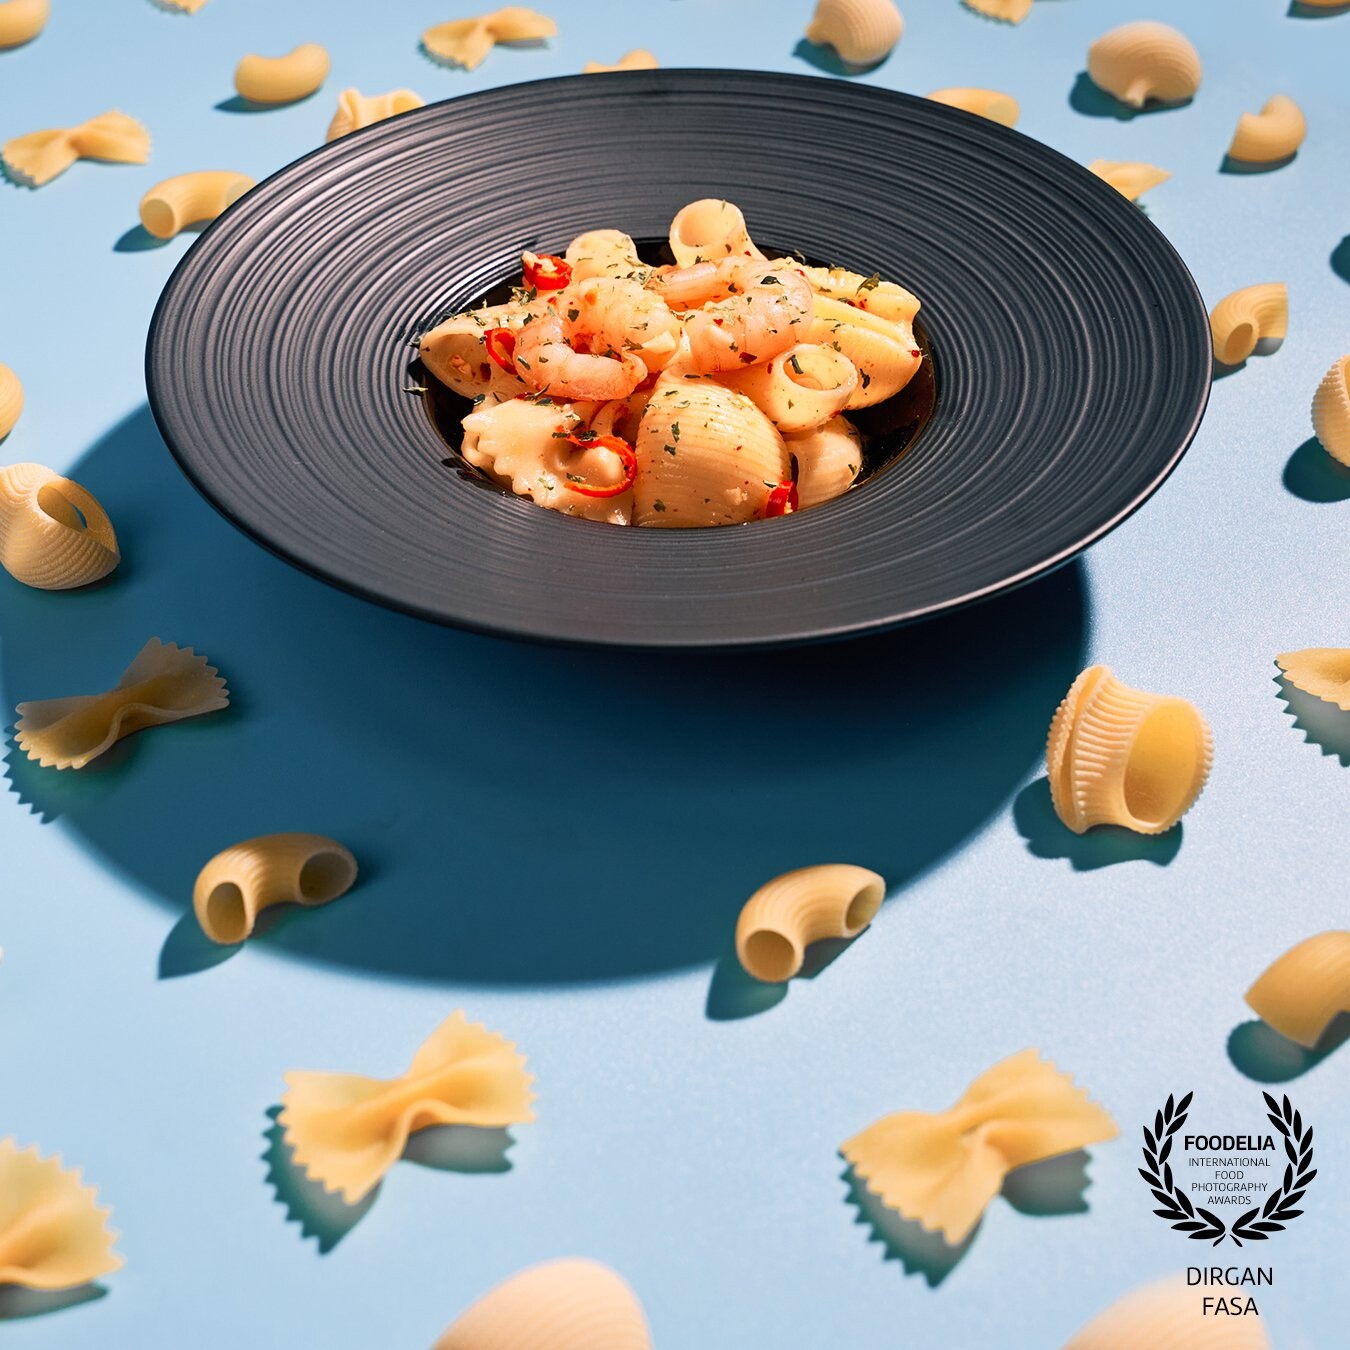 The project is about patterns. We looked through the pattern images related to pasta, nothing is quite memorable out there. So we decided to conquer the pattern and break it in style.